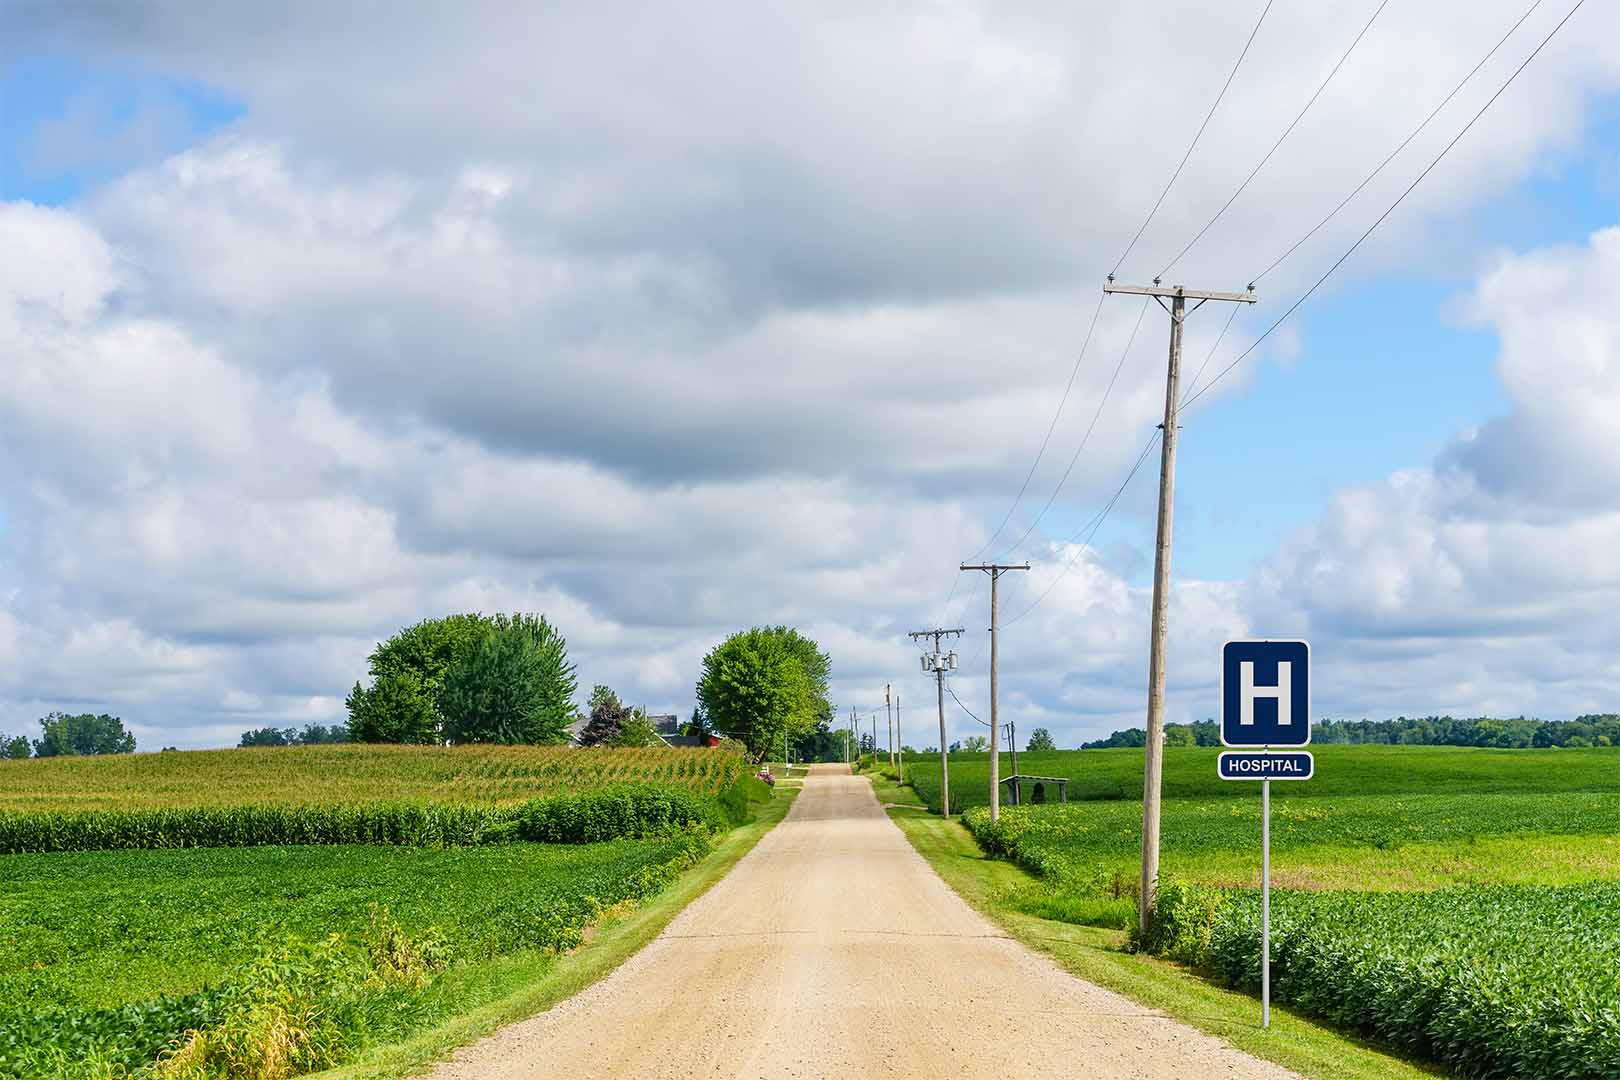 Image of a country road with road sign saying 